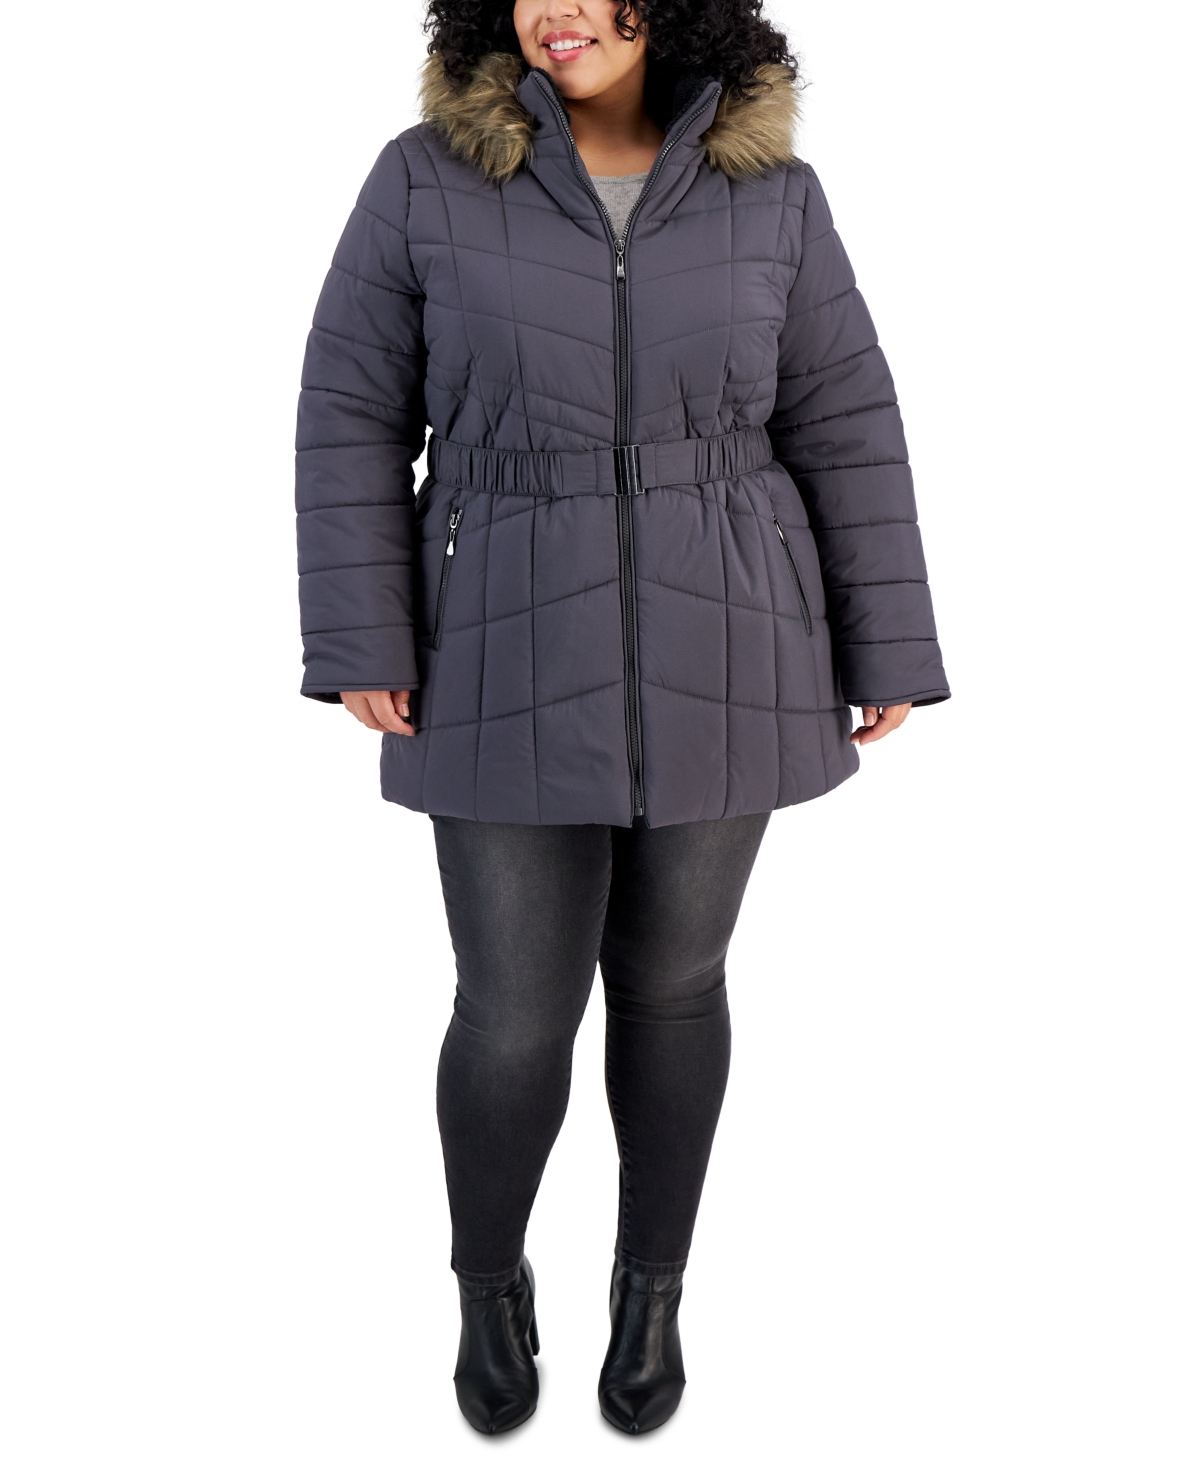 Maralyn & Me Juniors' Plus Size Belted Faux-Fur-Hooded Puffer Coat